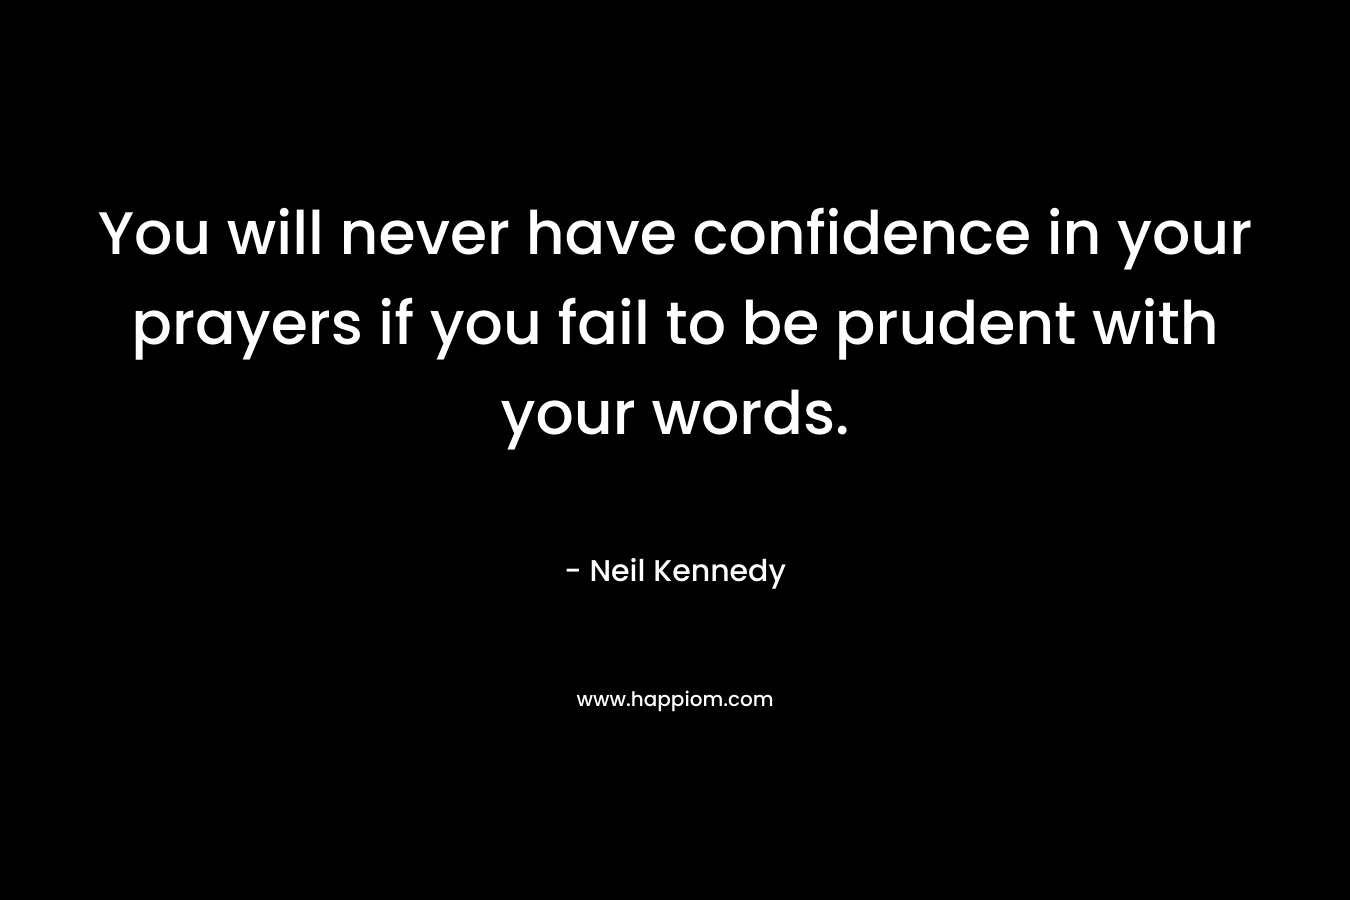 You will never have confidence in your prayers if you fail to be prudent with your words. – Neil Kennedy